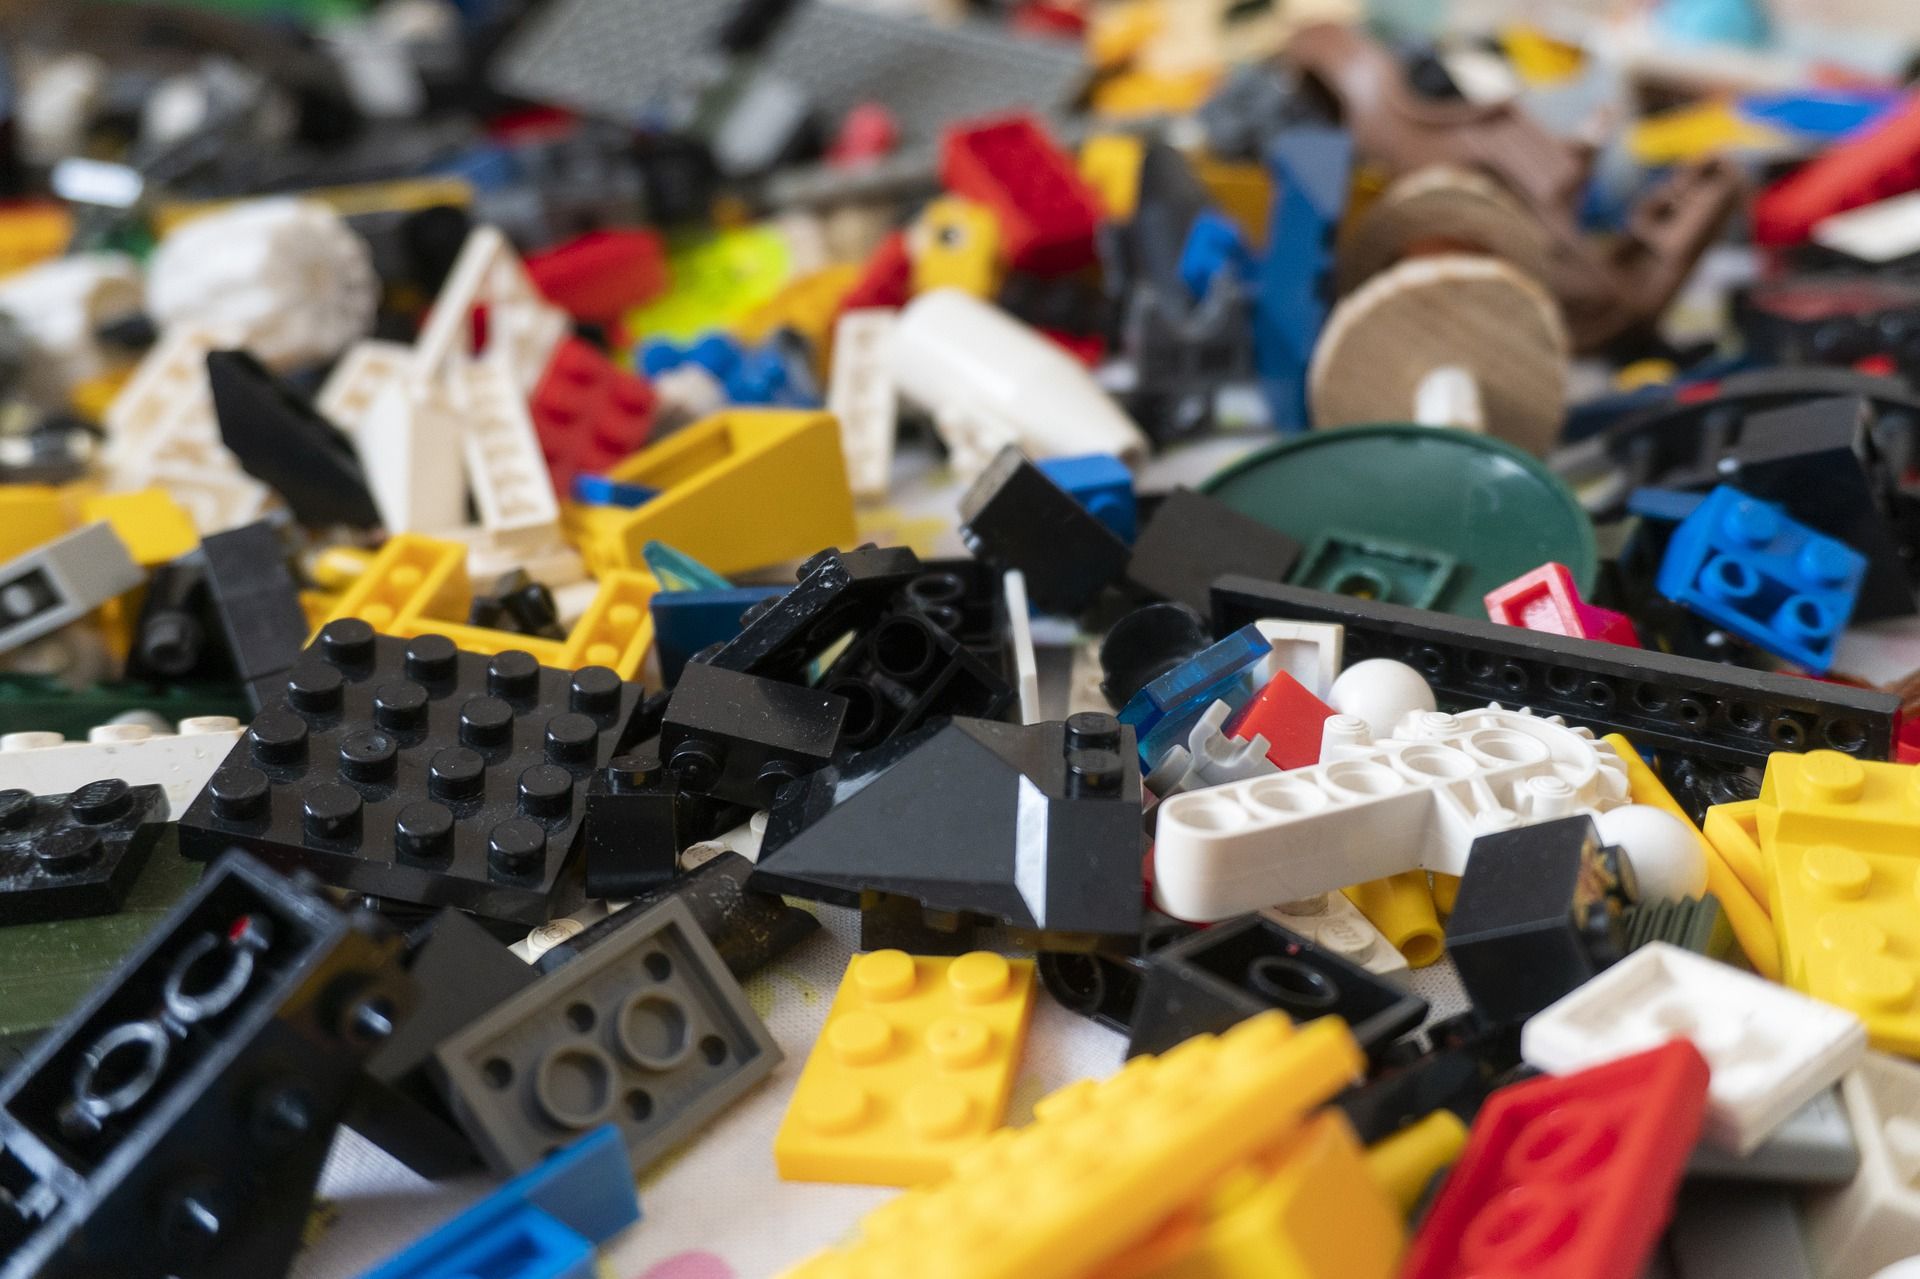 Business Round-Up: Lego collectors willing to pay 14,000 kroner for controversial set